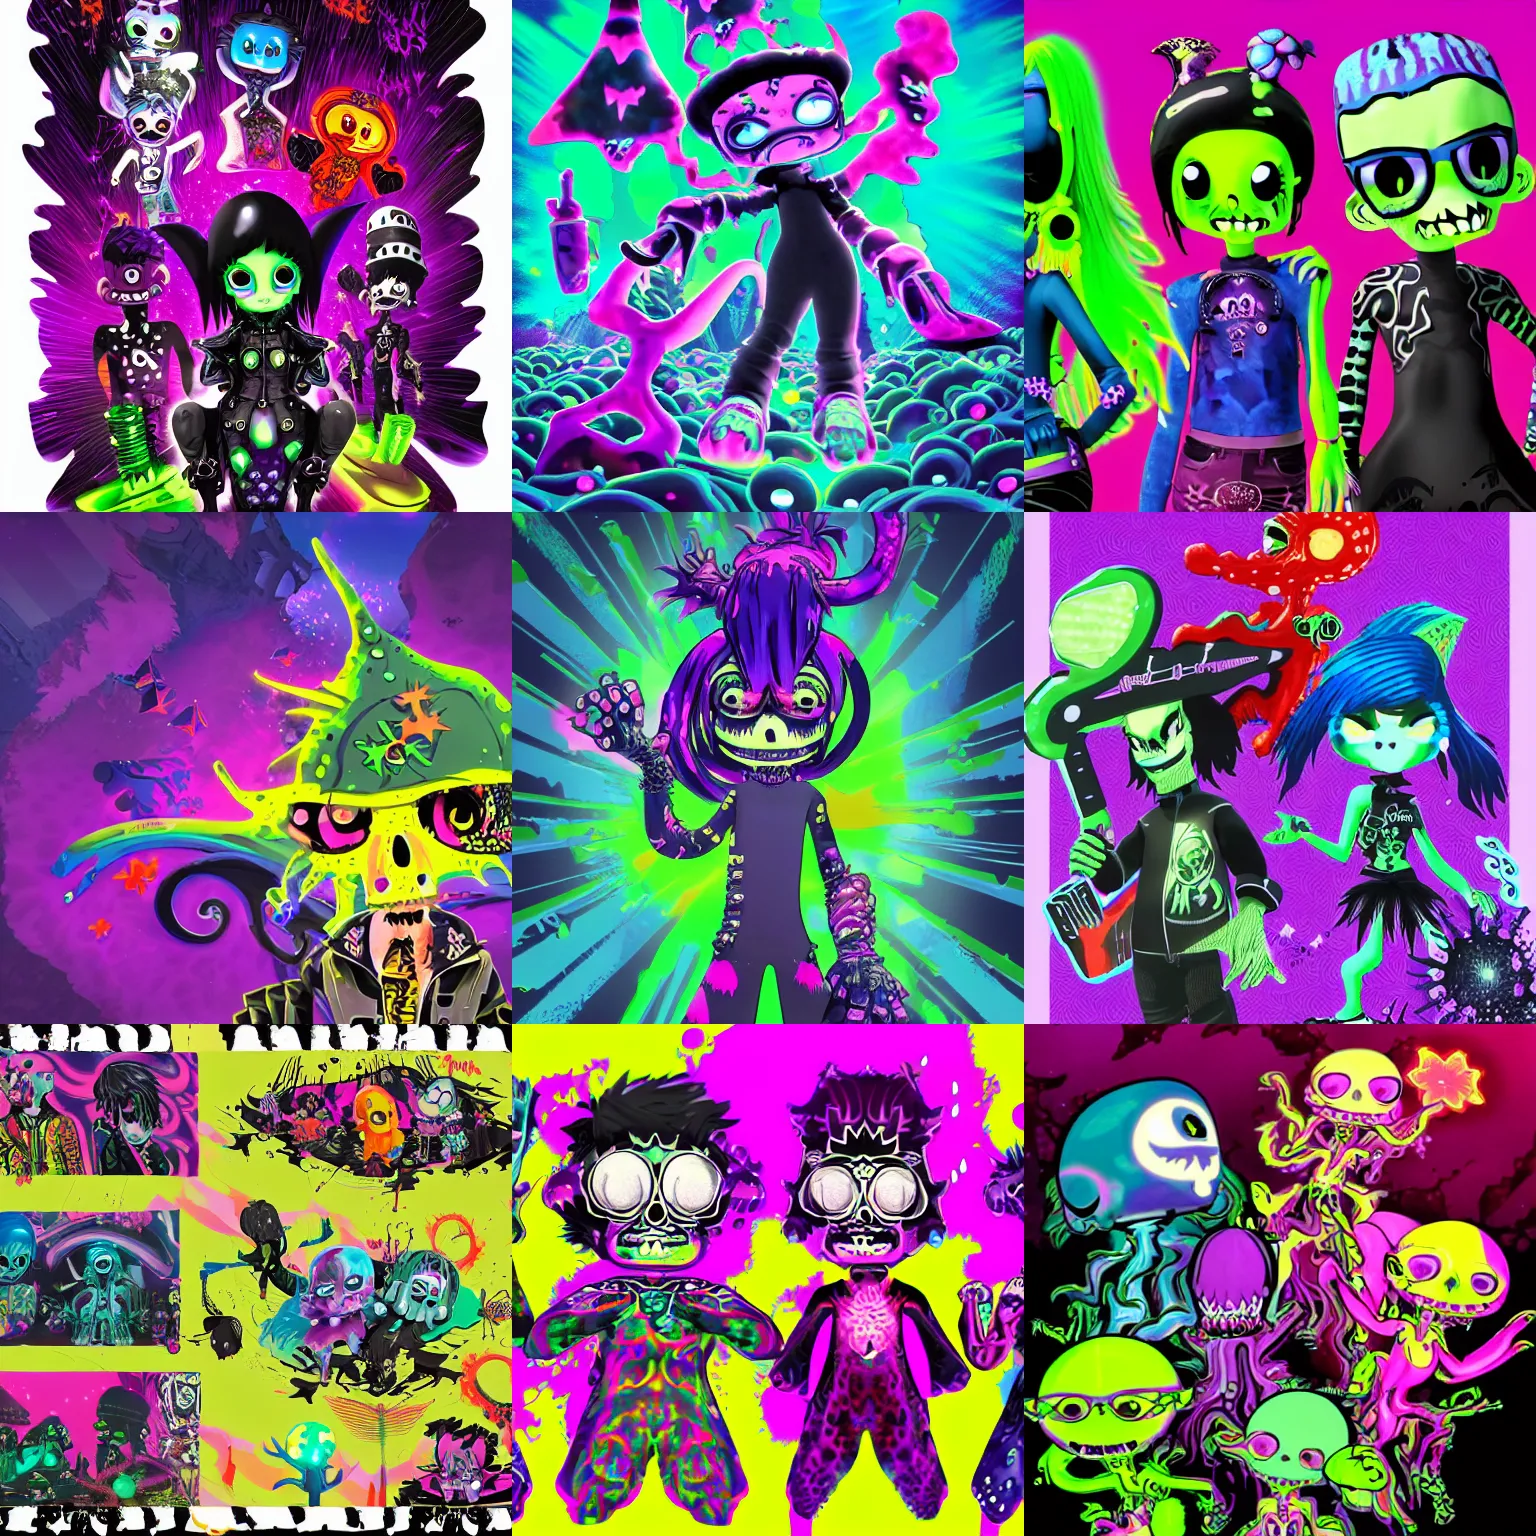 Prompt: CGI lisa frank gothic punk glow in the dark vampiric rockstar underwater caustics vampire squid background designs of various shapes and sizes by genndy tartakovsky and the creators of fret nice at pieces interactive and splatoon by nintendo and psychonauts by doublefines tim shafer being overseen by Jamie Hewlett from gorillaz for splatoon by nintendo